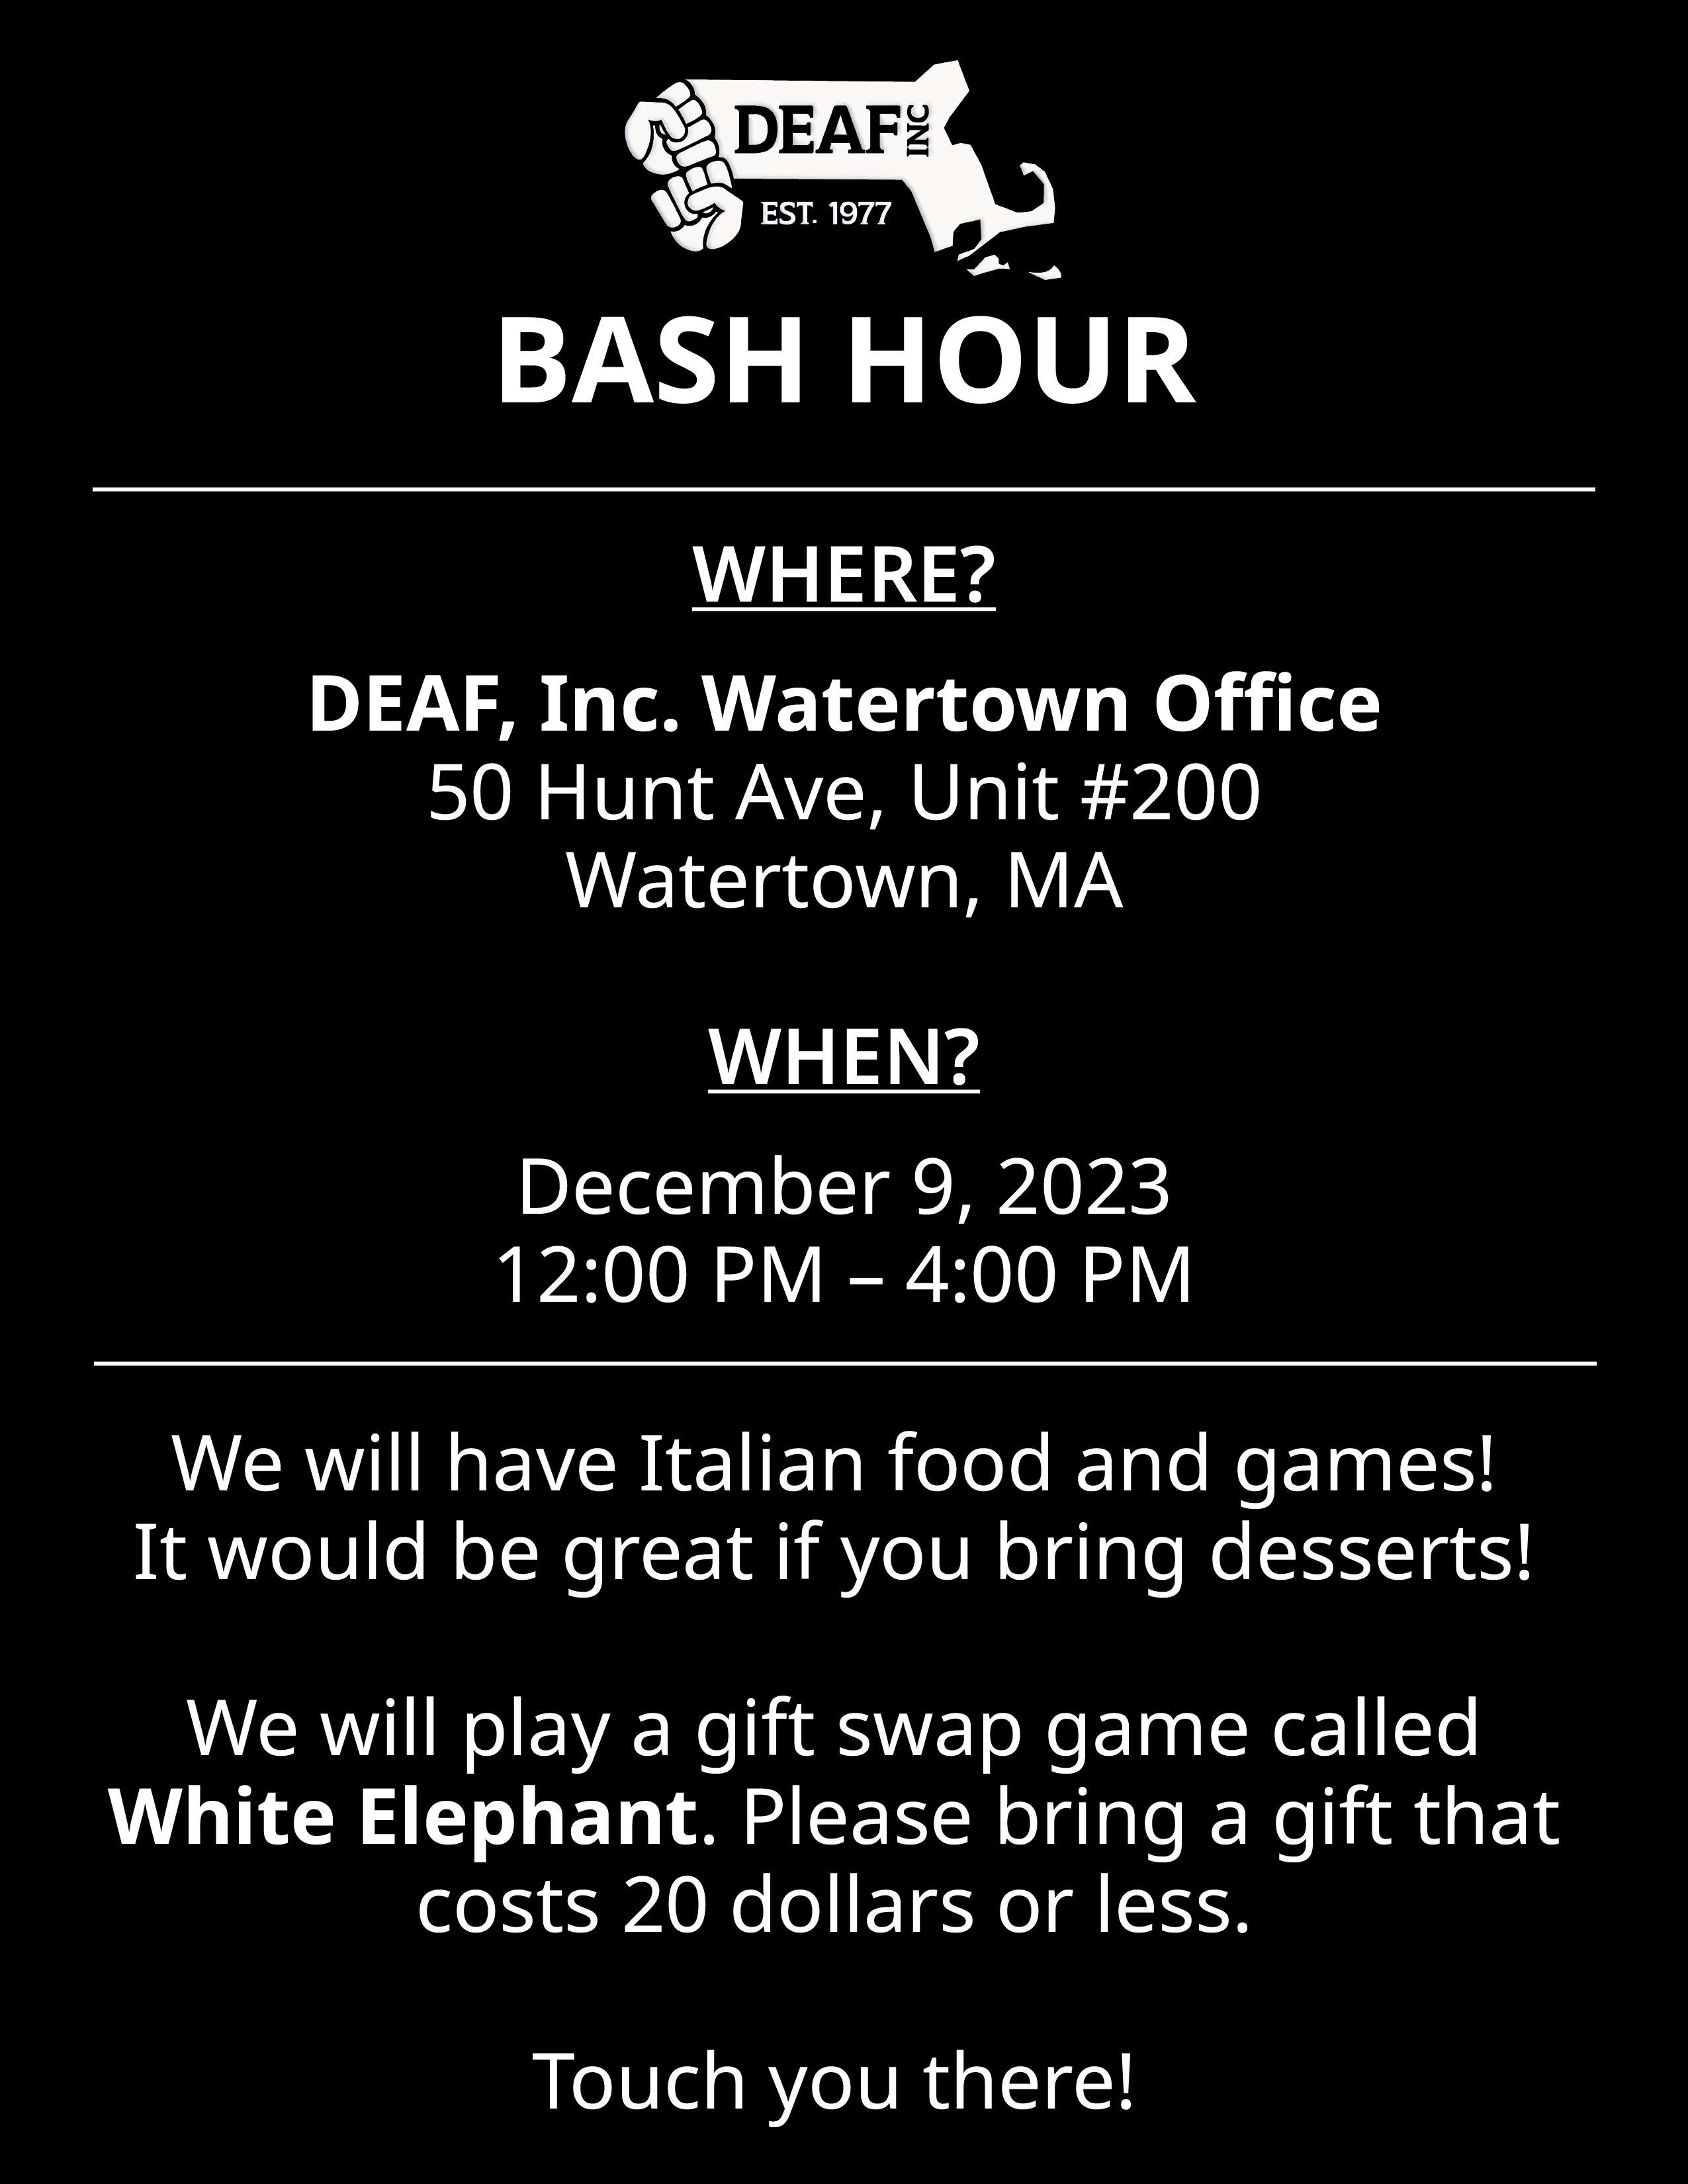 A black background flyer with information in white text as follows, “BASH HOUR WHERE? DEAF, Inc. Watertown Office 50 Hunt Ave, Unit #200 Watertown, MA WHEN? December 9, 2023 12:00 PM - 4:00 PM We will have Italian food and games! It would be great if you bring desserts! We will play a gift swap game called White Elephant. Please bring a gift that costs 20 dollars or less. Touch you there!” At the first top of the flyer is the DEAF, Inc. logo.